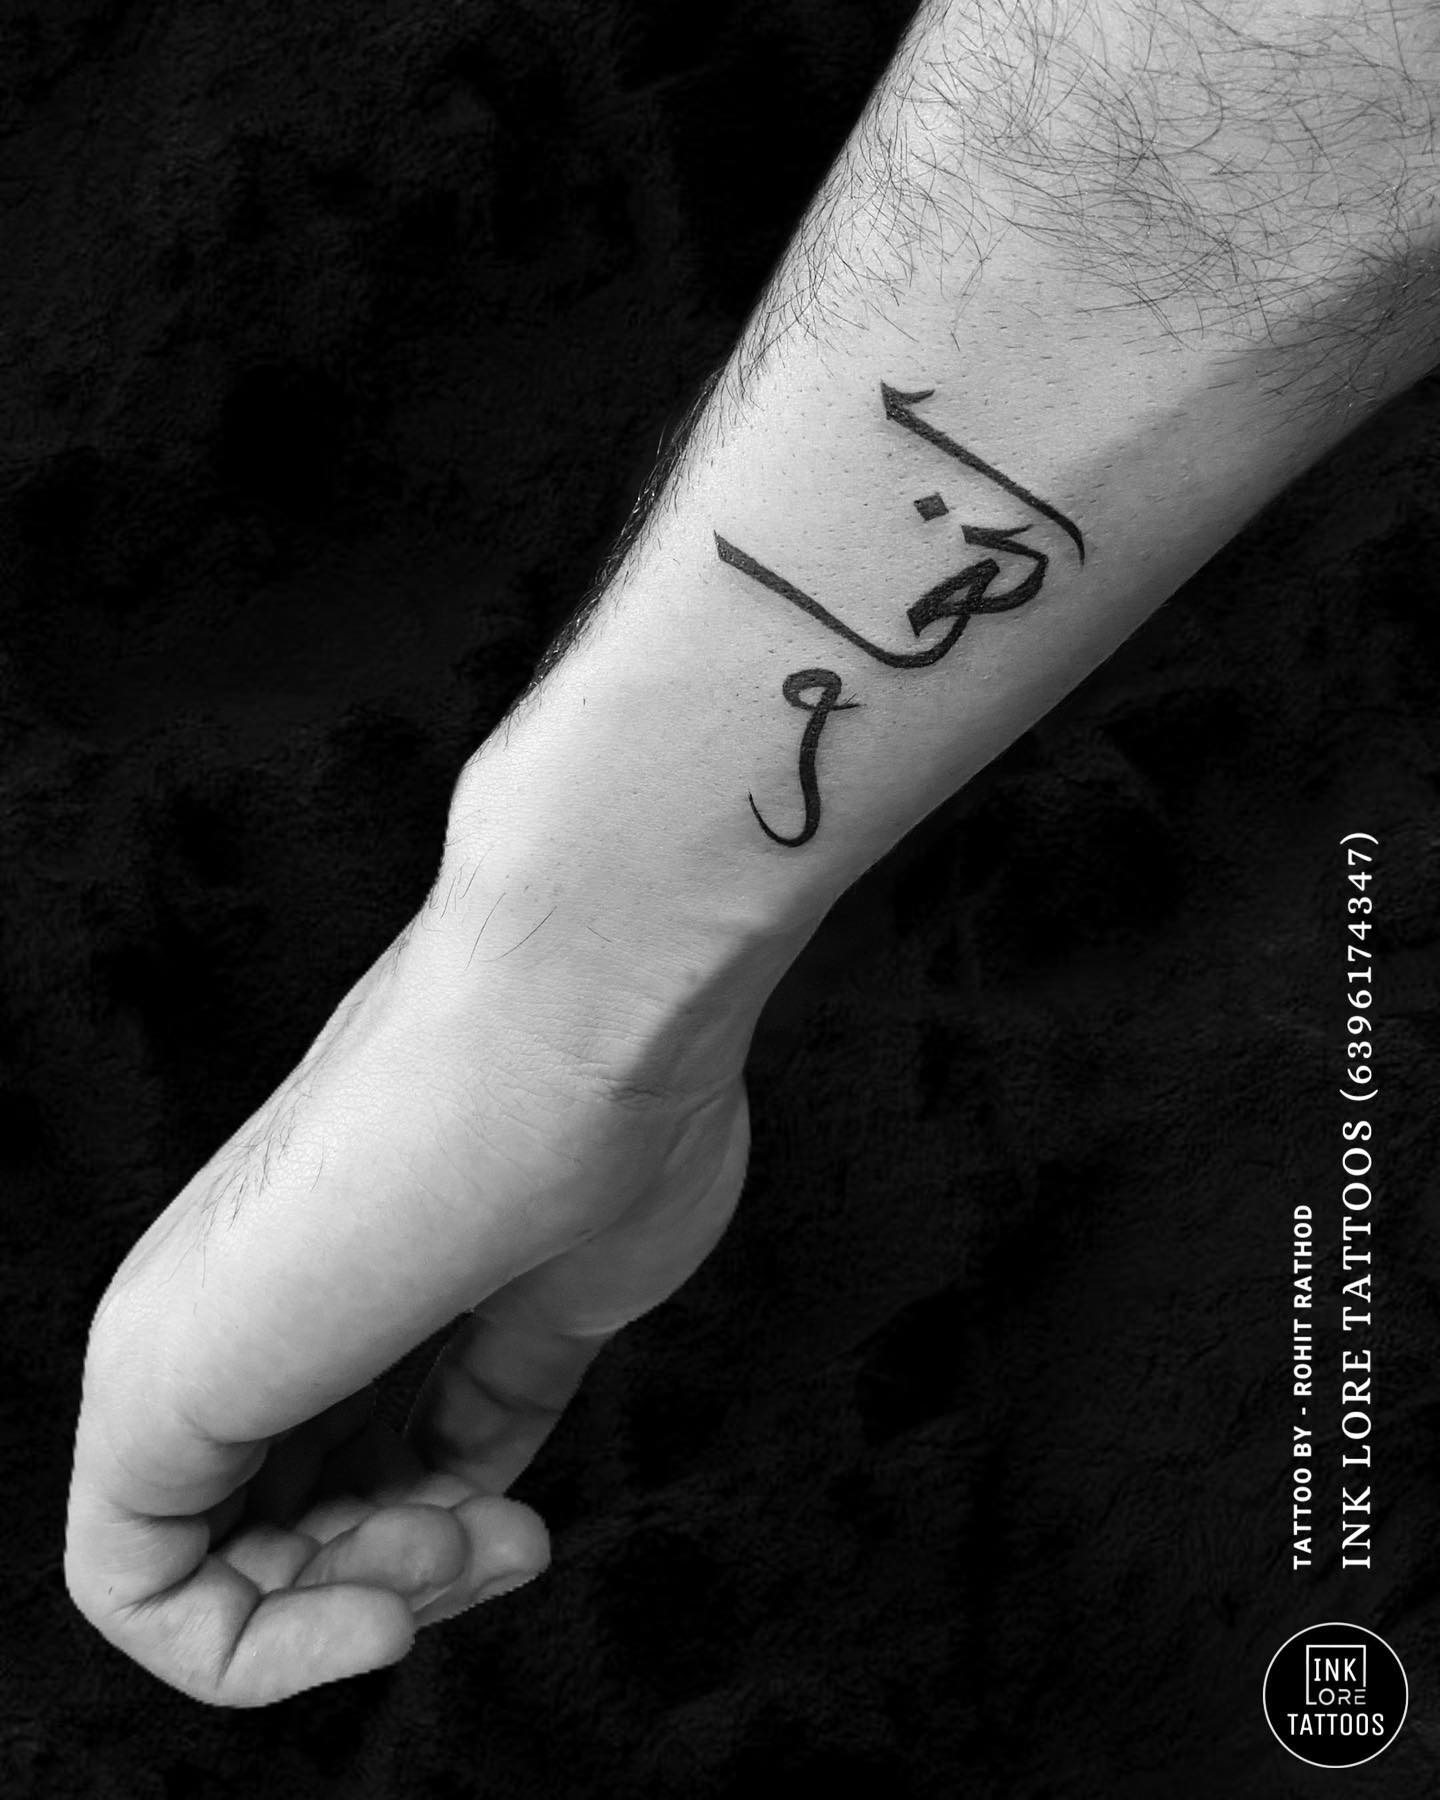 It’s just an amazing language, isn’t it? You can get an Arabic tattoo on your arm near to your wrist and look fabulous.